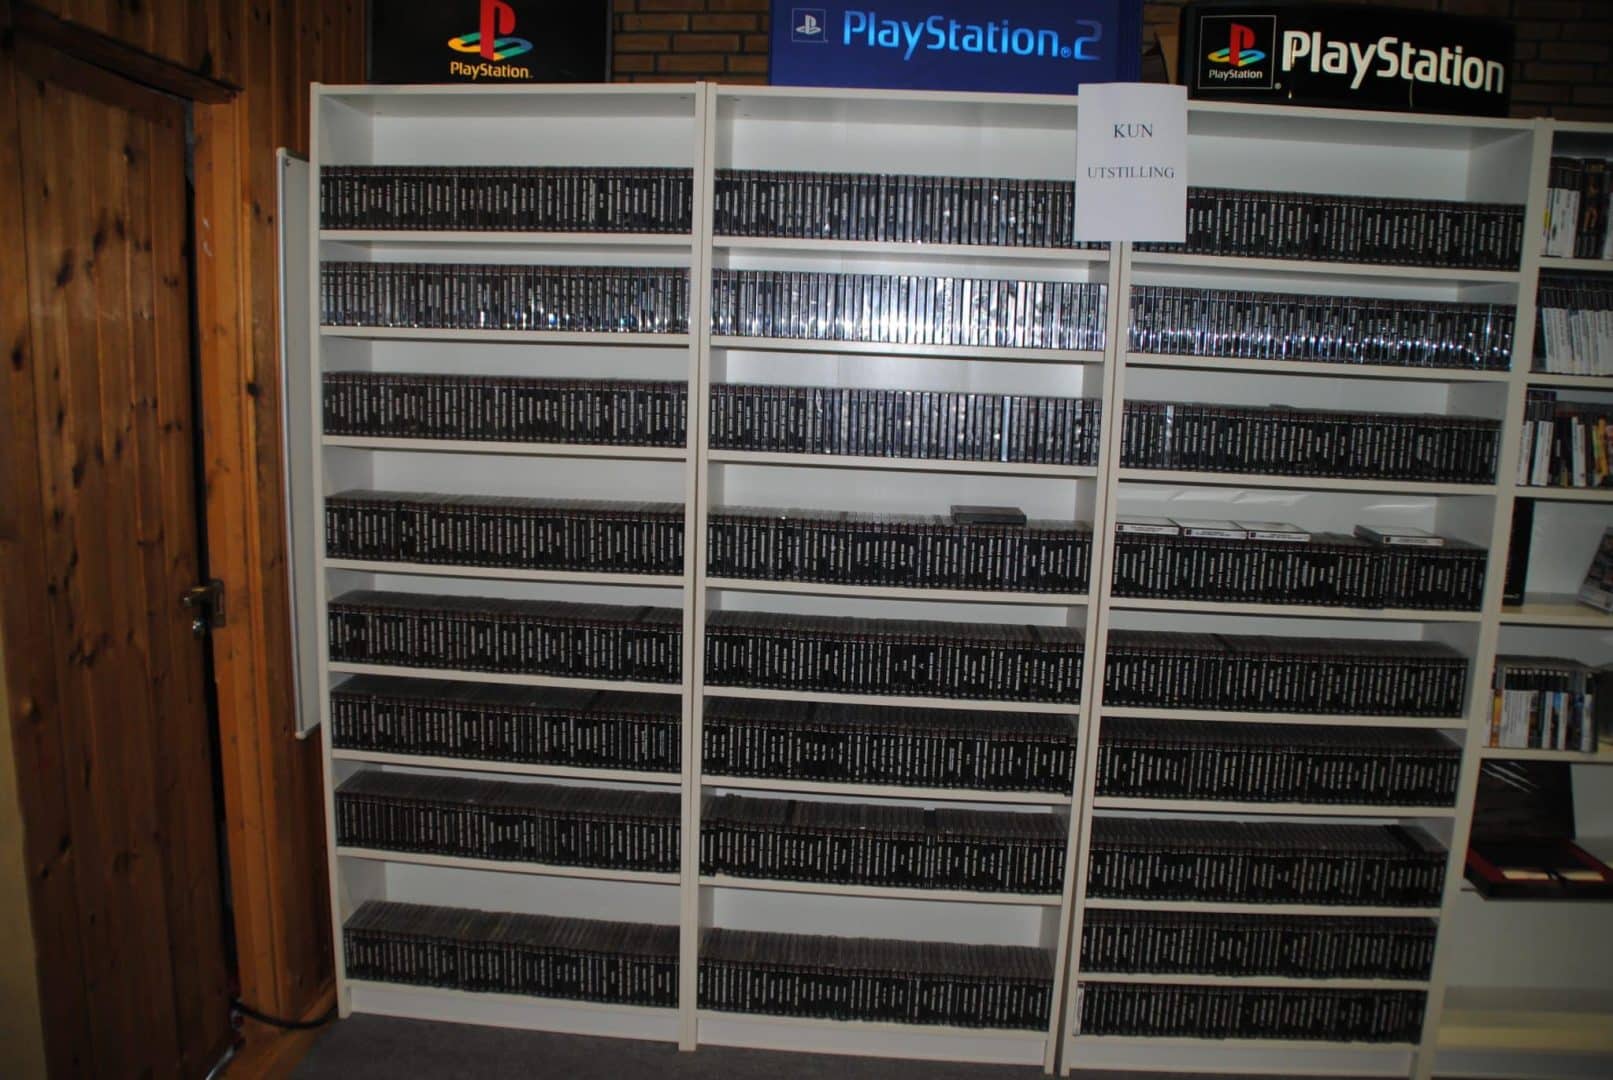 One of Norway's largest PSone collections.